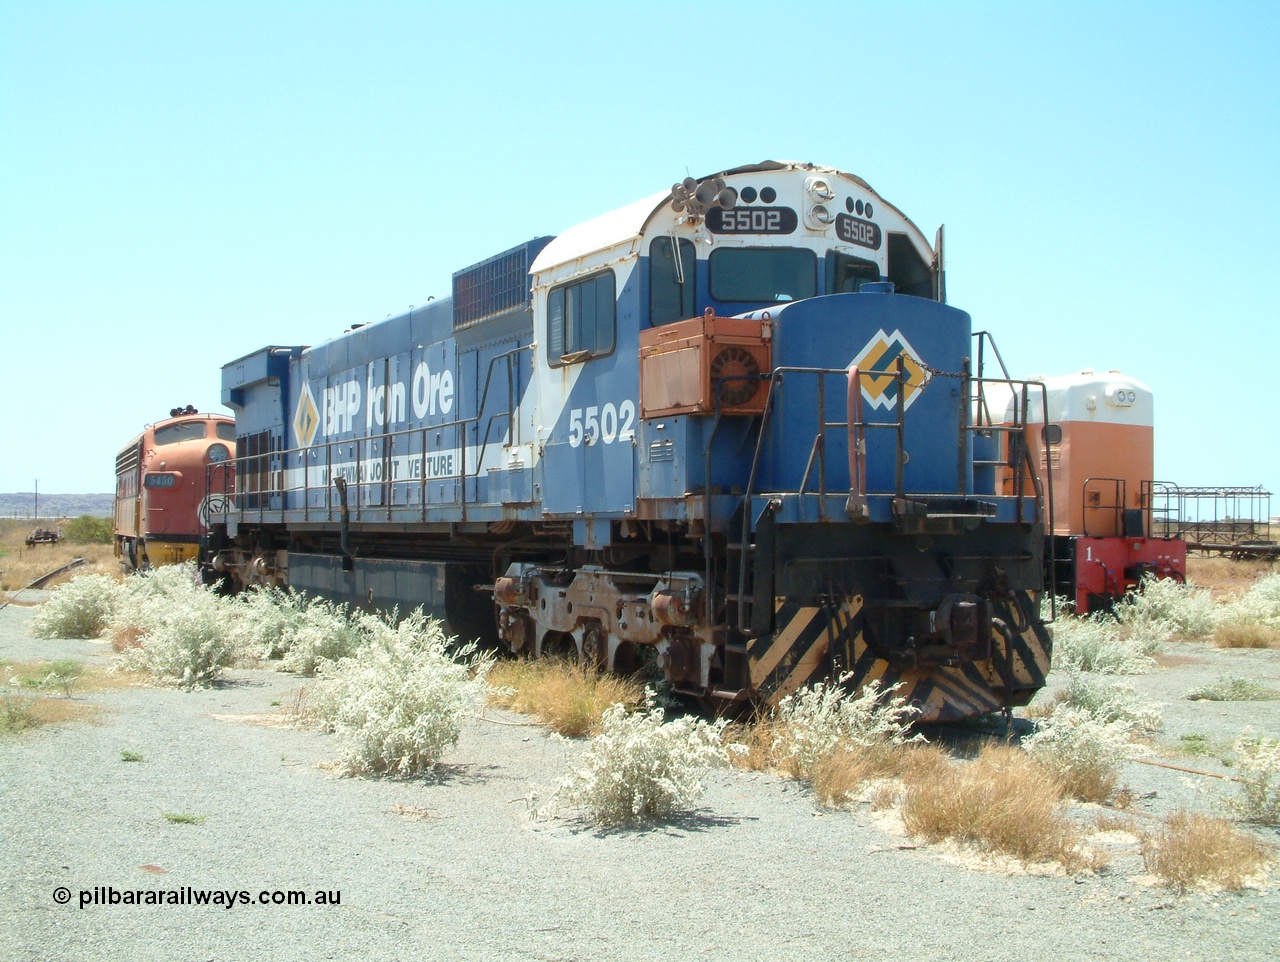 041014 122542
Pilbara Railways Historical Society museum, Australian built by Comeng NSW an MLW ALCo M636 unit formerly owned by Mt Newman Mining and BHP Iron Ore 5502 serial number C6096-7 built in July 1976, retired in 1994, donated to the Society in November 1995. 14th October 2004.
Keywords: 5502;Comeng-NSW;MLW;ALCo;M636;C6096-7;